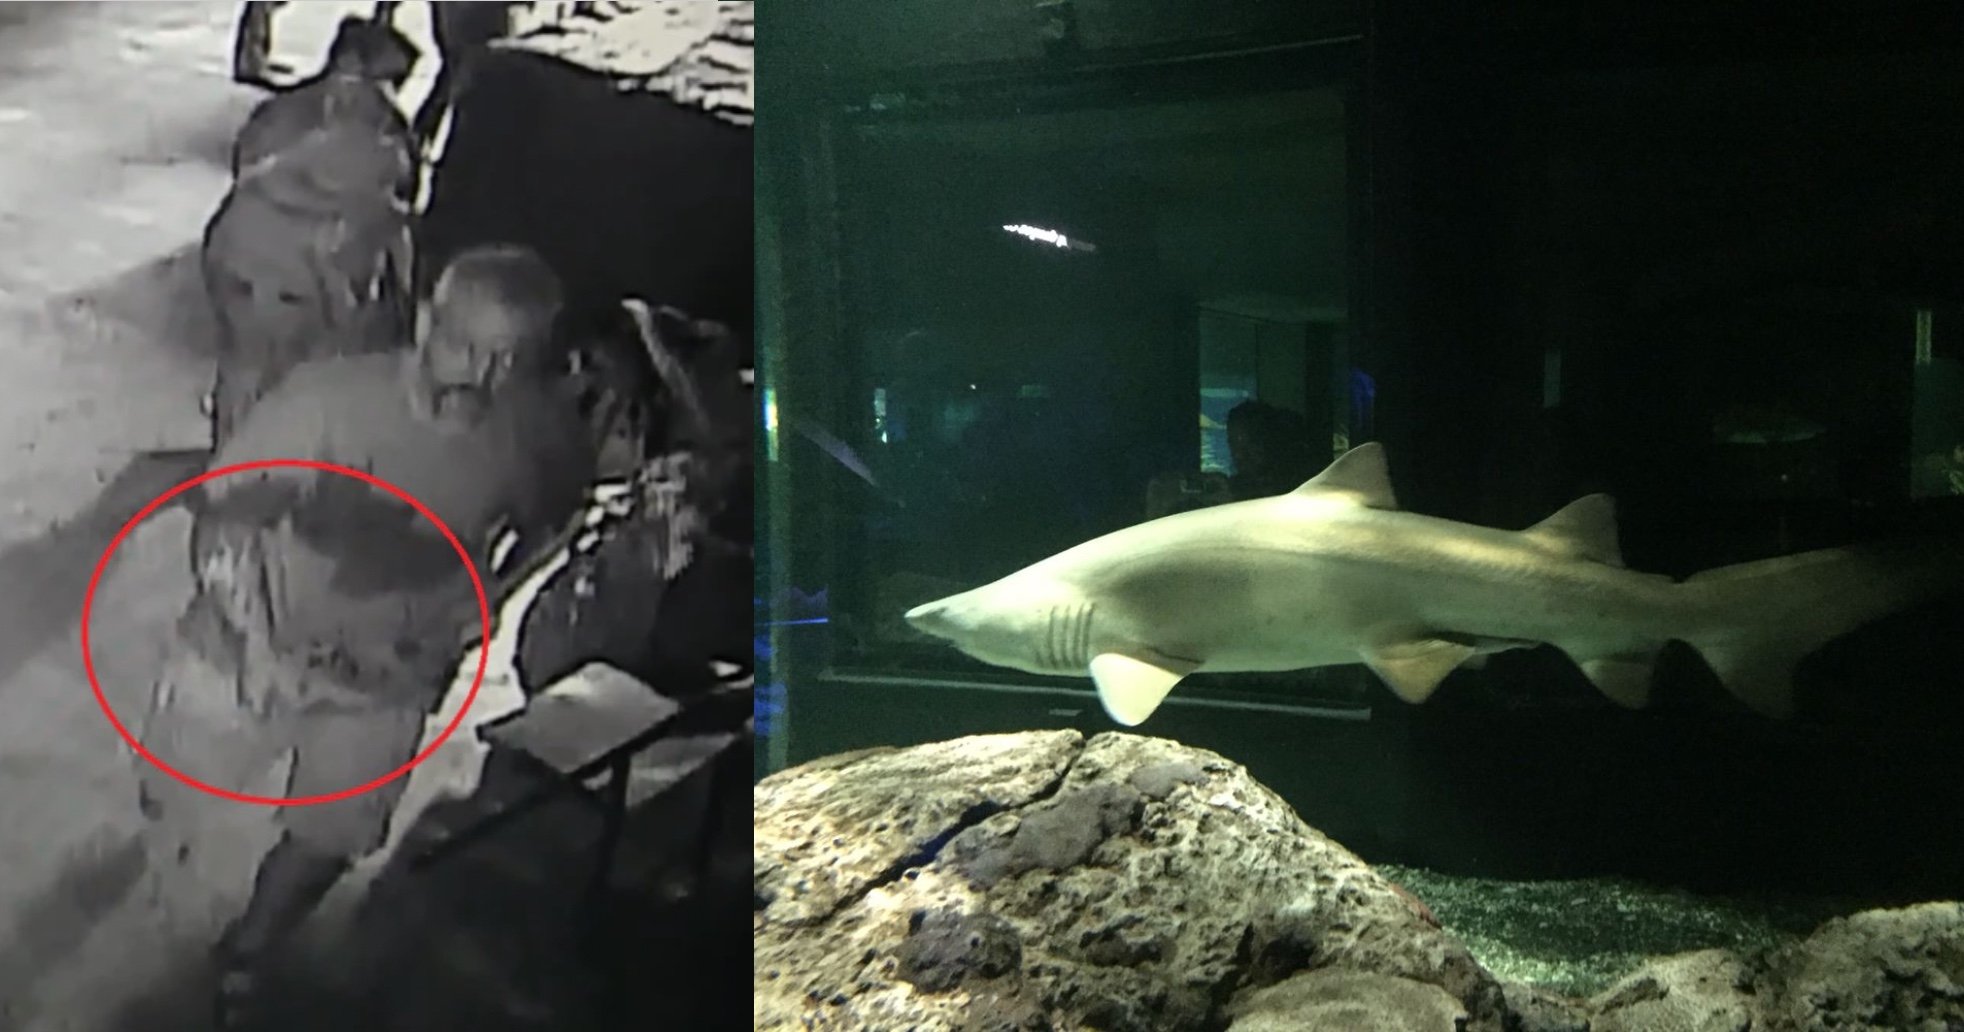 shark 1.jpg?resize=412,232 - Utterly ‘Insane’ Robbery In San Antonio Aquarium - Disguises A Shark Into A Baby And Hid It In The Stroller